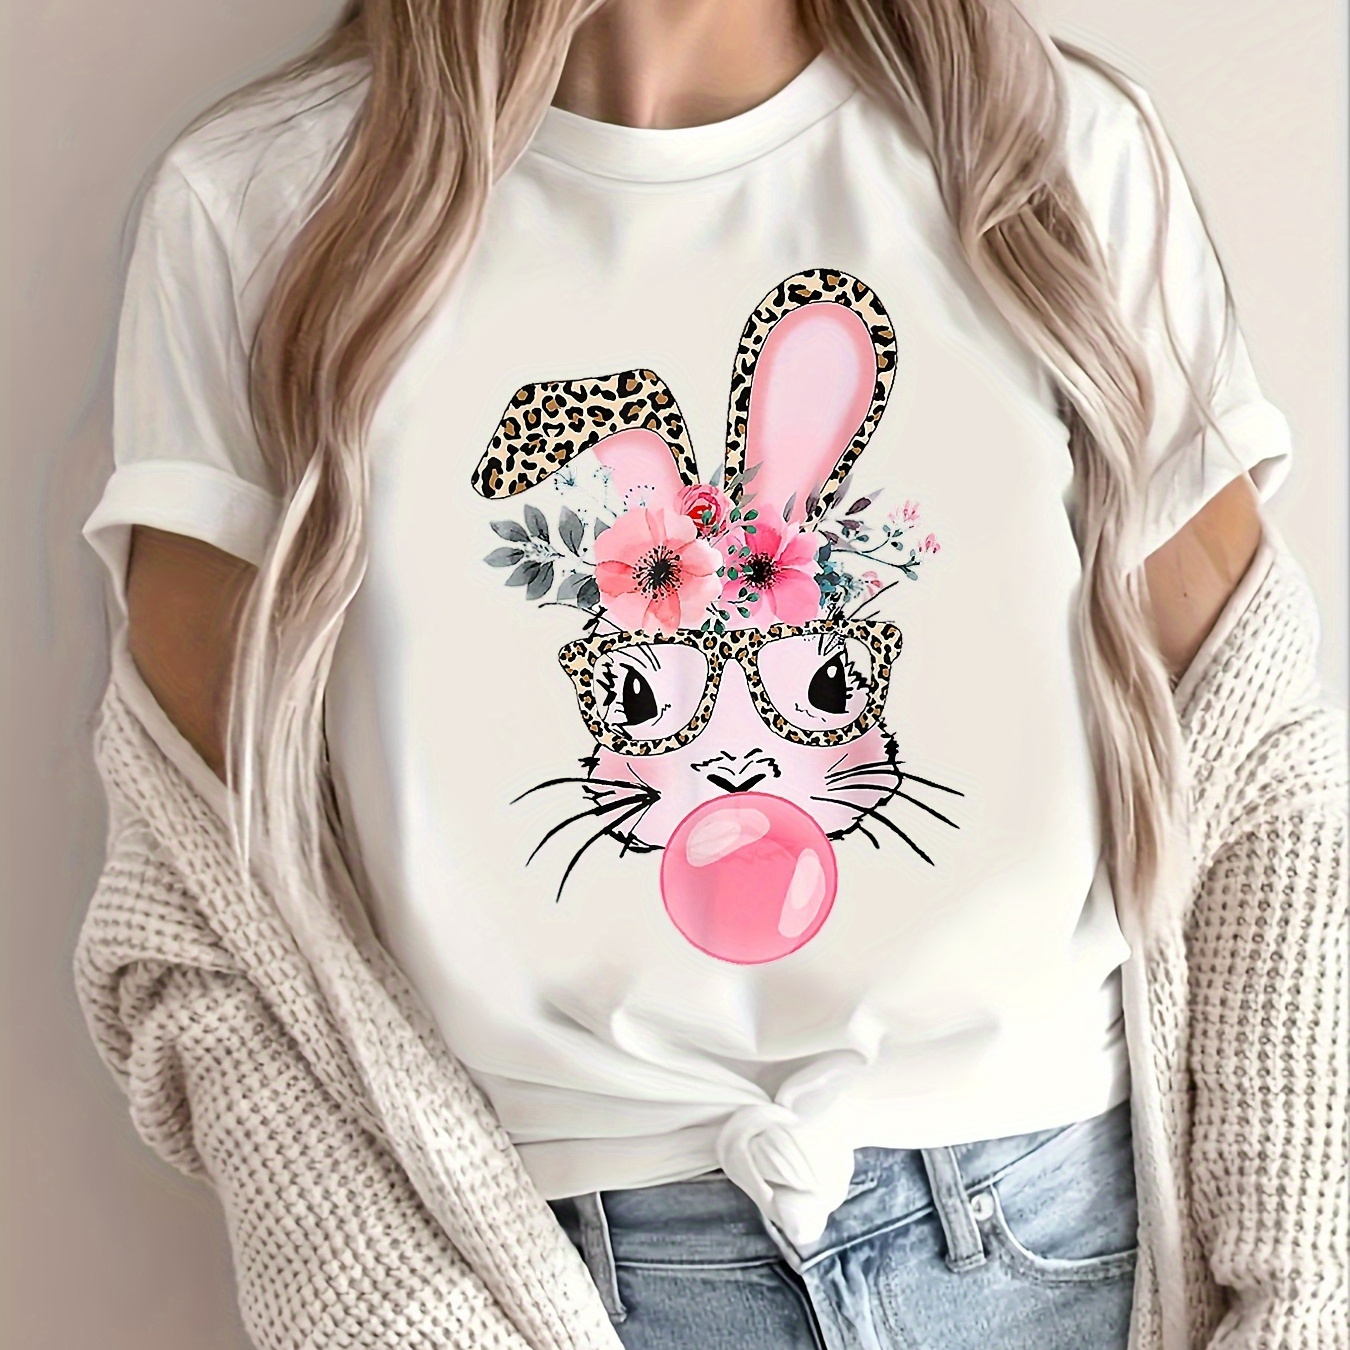 

Rabbit Print Crew Neck T-shirt, Casual Short Sleeve Top For Spring & Summer, Women's Clothing